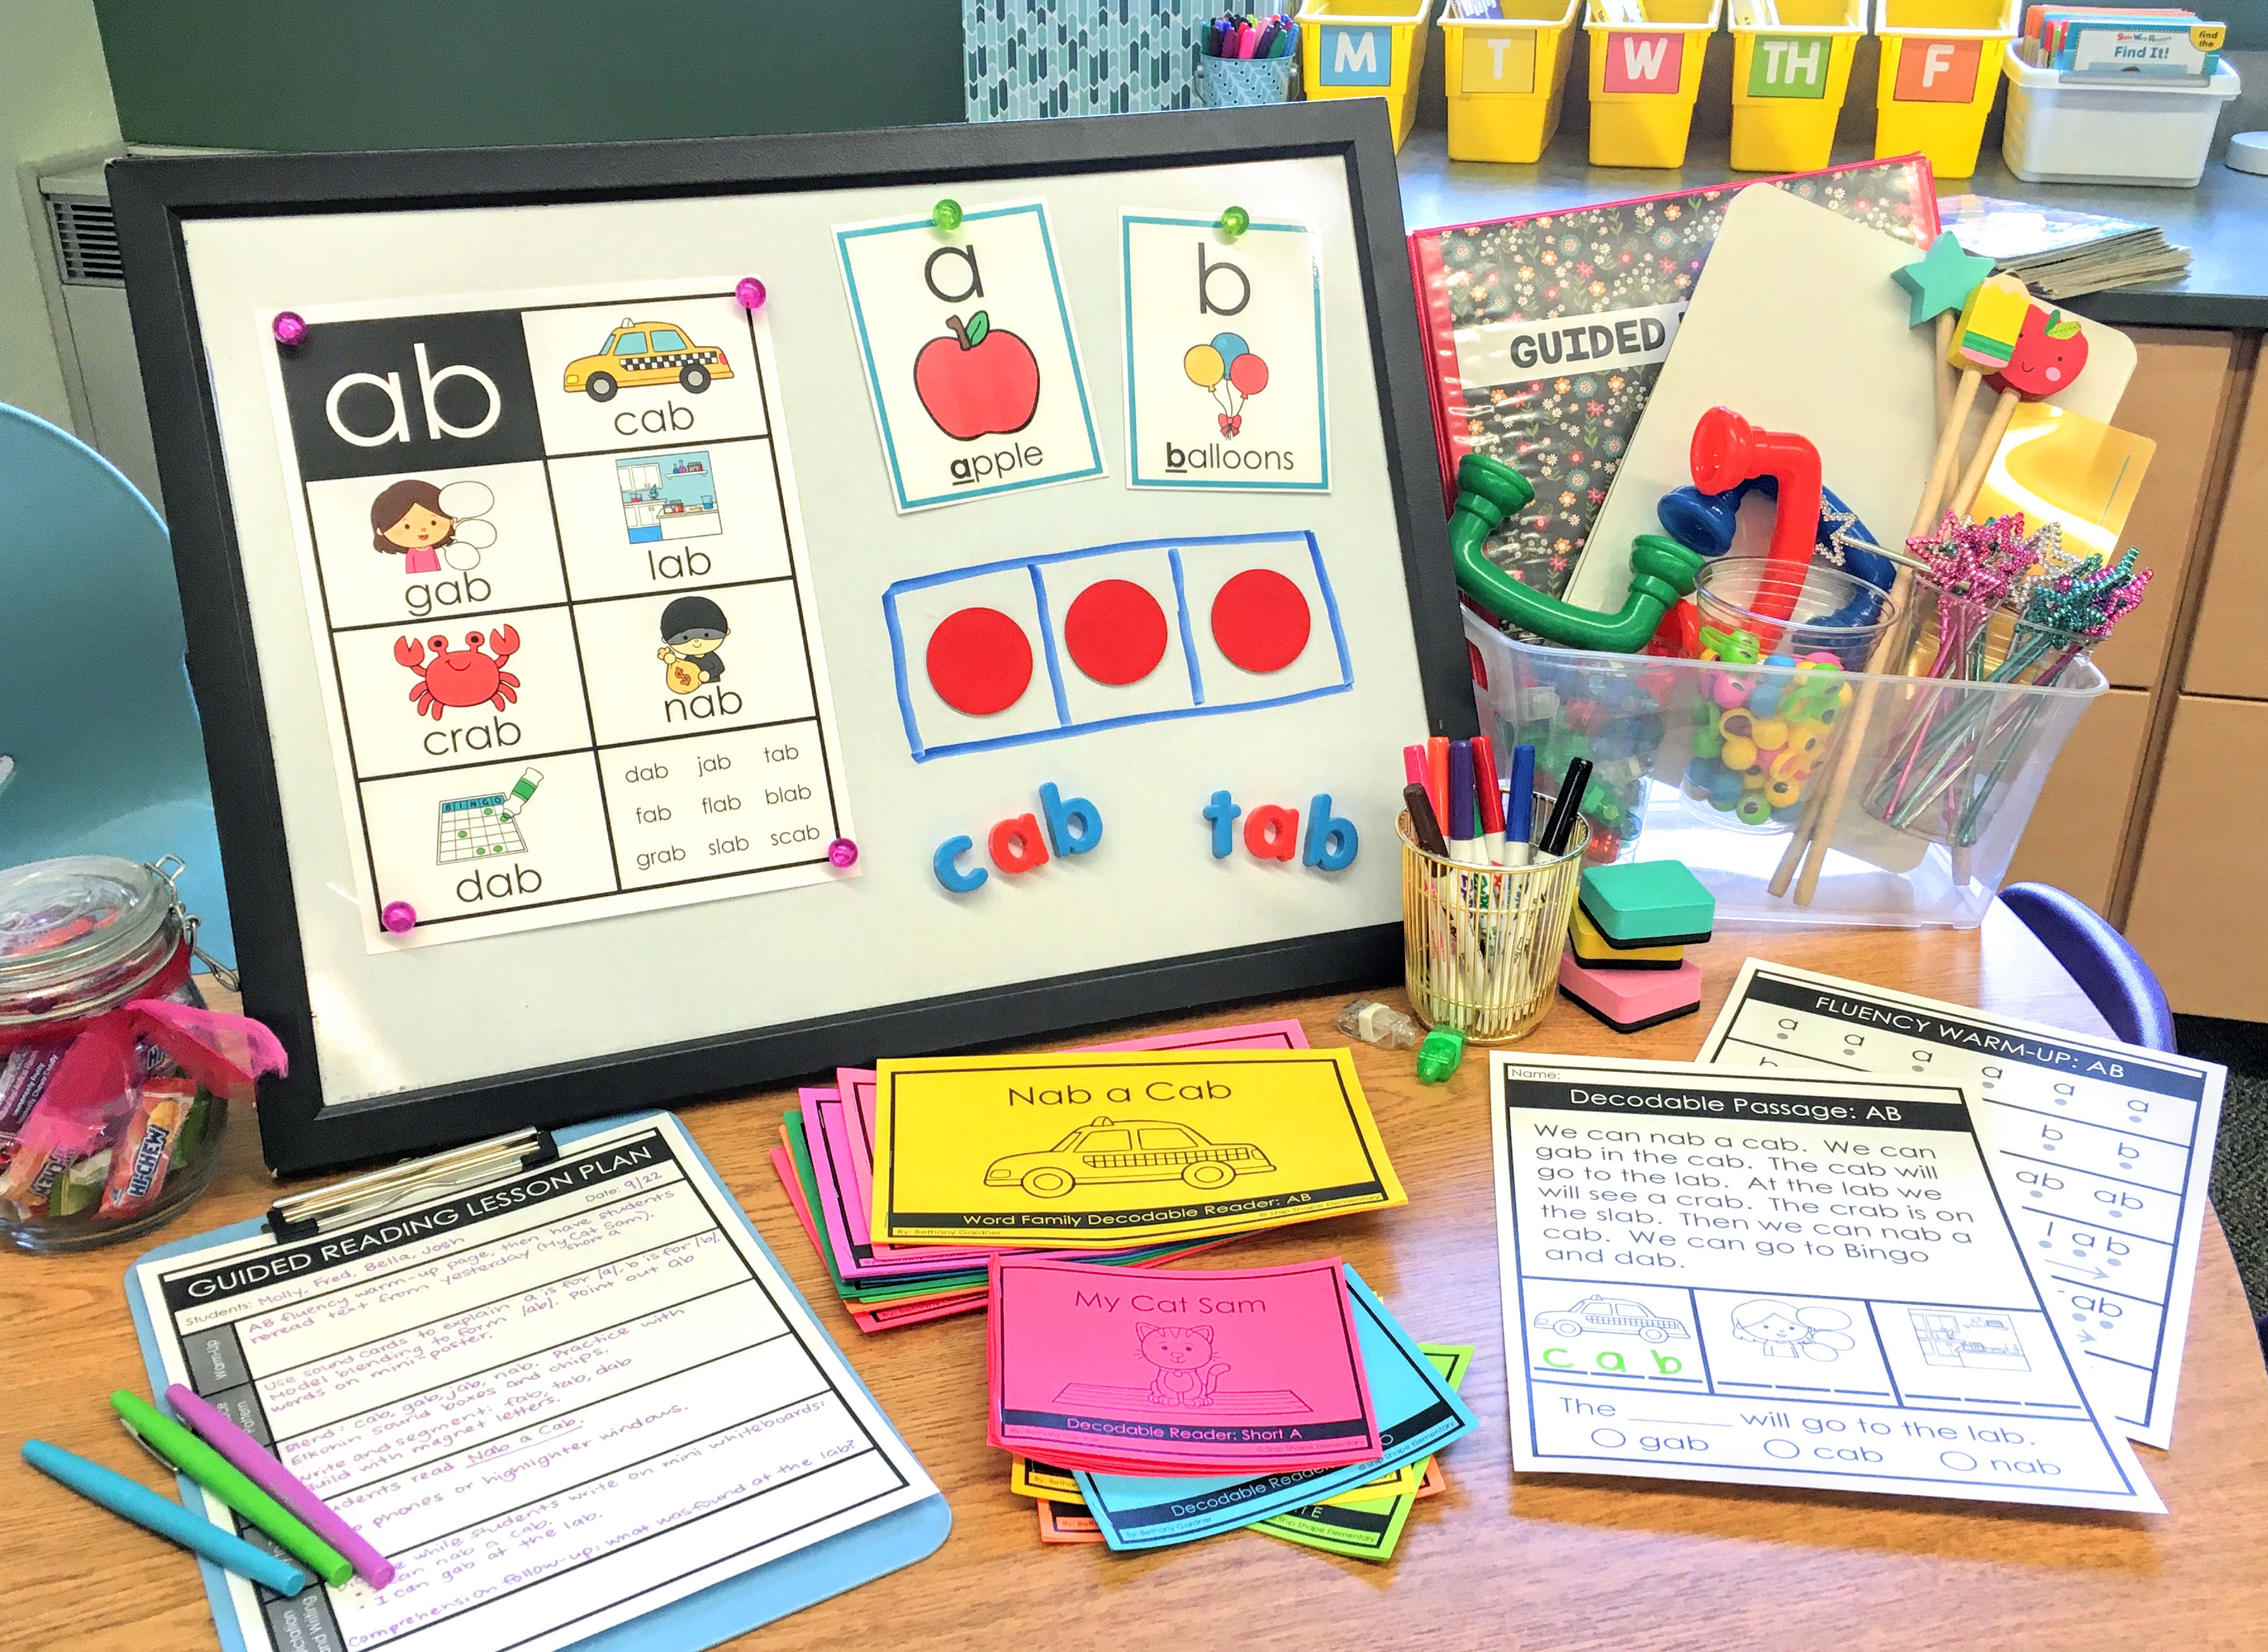 teaching materials and free decodable books to use while teaching guided reading.